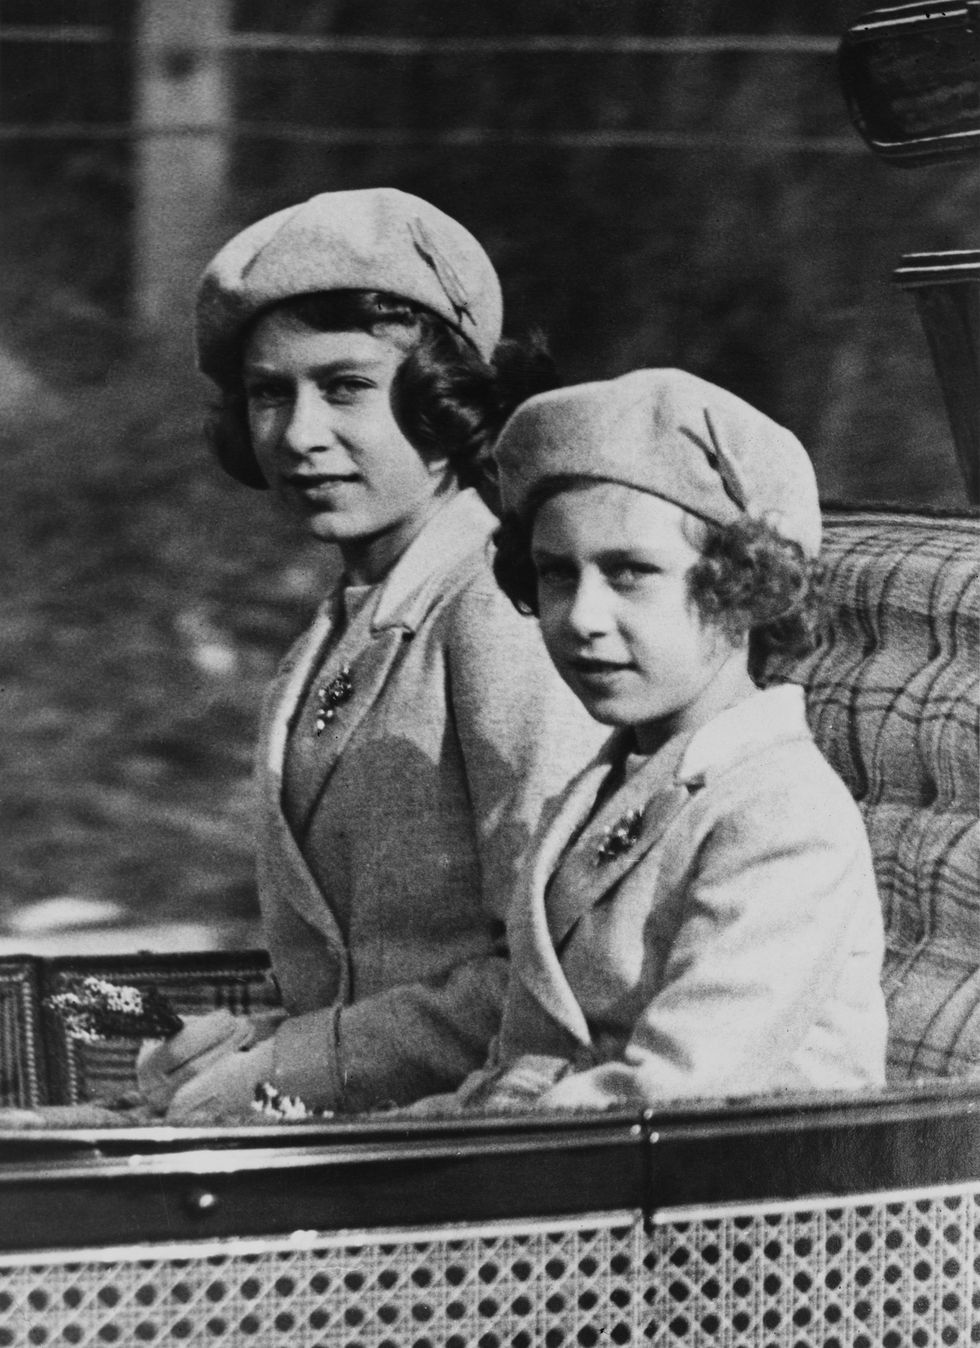 princess elizabeth later queen elizabeth ii and princess margaret 1930 2002 ride in a carriage with the king and queen to crathie kirk from balmoral castle to attend a morning service, scotland, 9th october 1938 photo by topical press agencygetty images